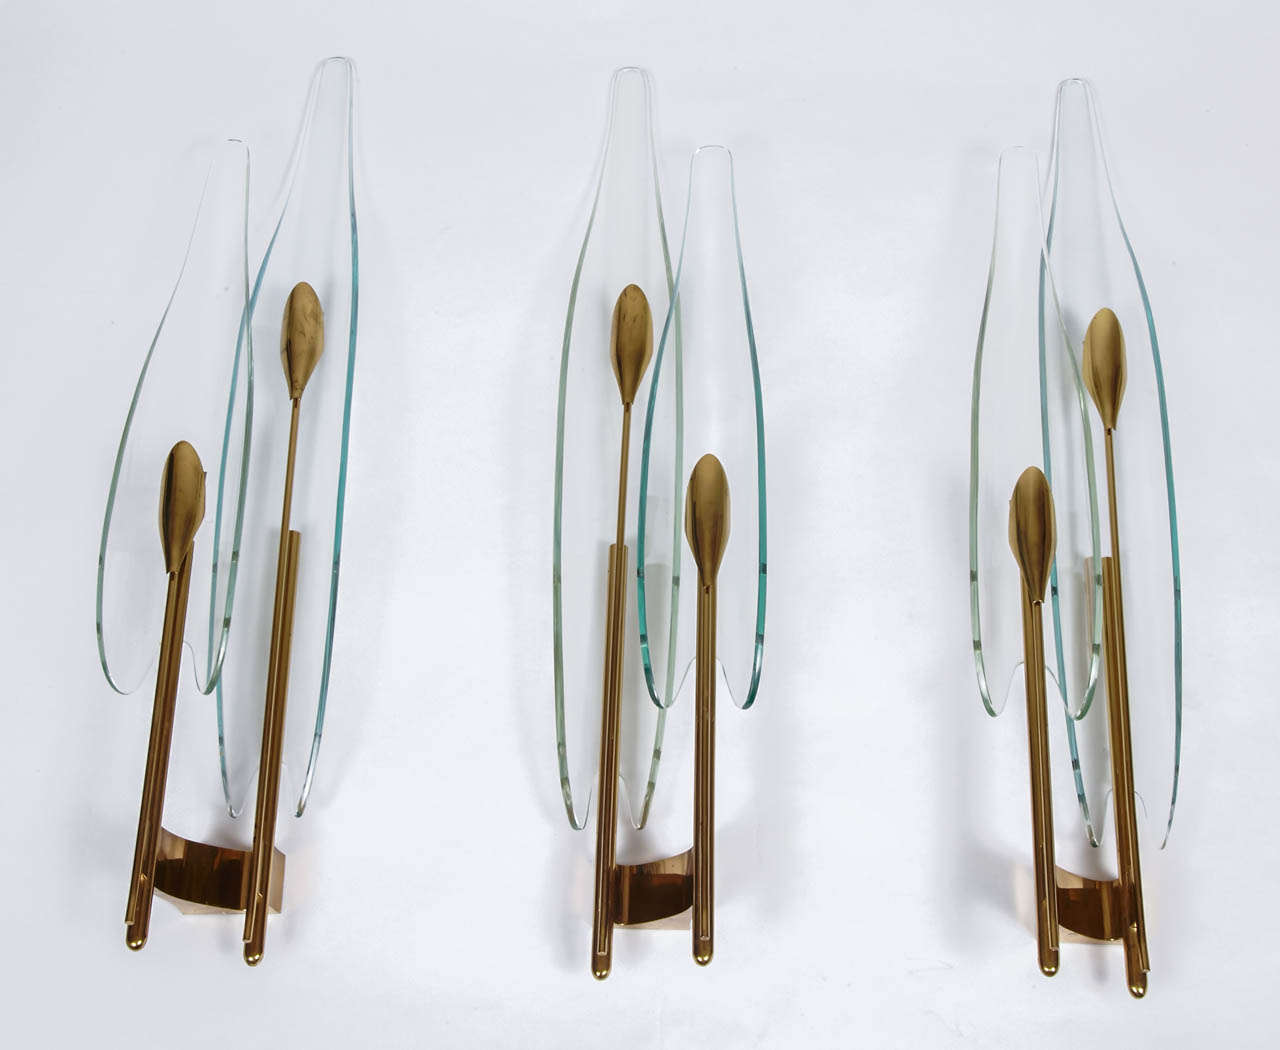 Rare set of three clear curved glass and gilt brass “Dahlia” wall-sconces 
with two arms, by Max Ingrand for Fontana Arte, Italy, circa 1955.

(We can sell a pair at 7000 e).

Ref : Franco Deboni, Fontana Arte : G.Ponti, P.Chiesa, M.Ingrand,